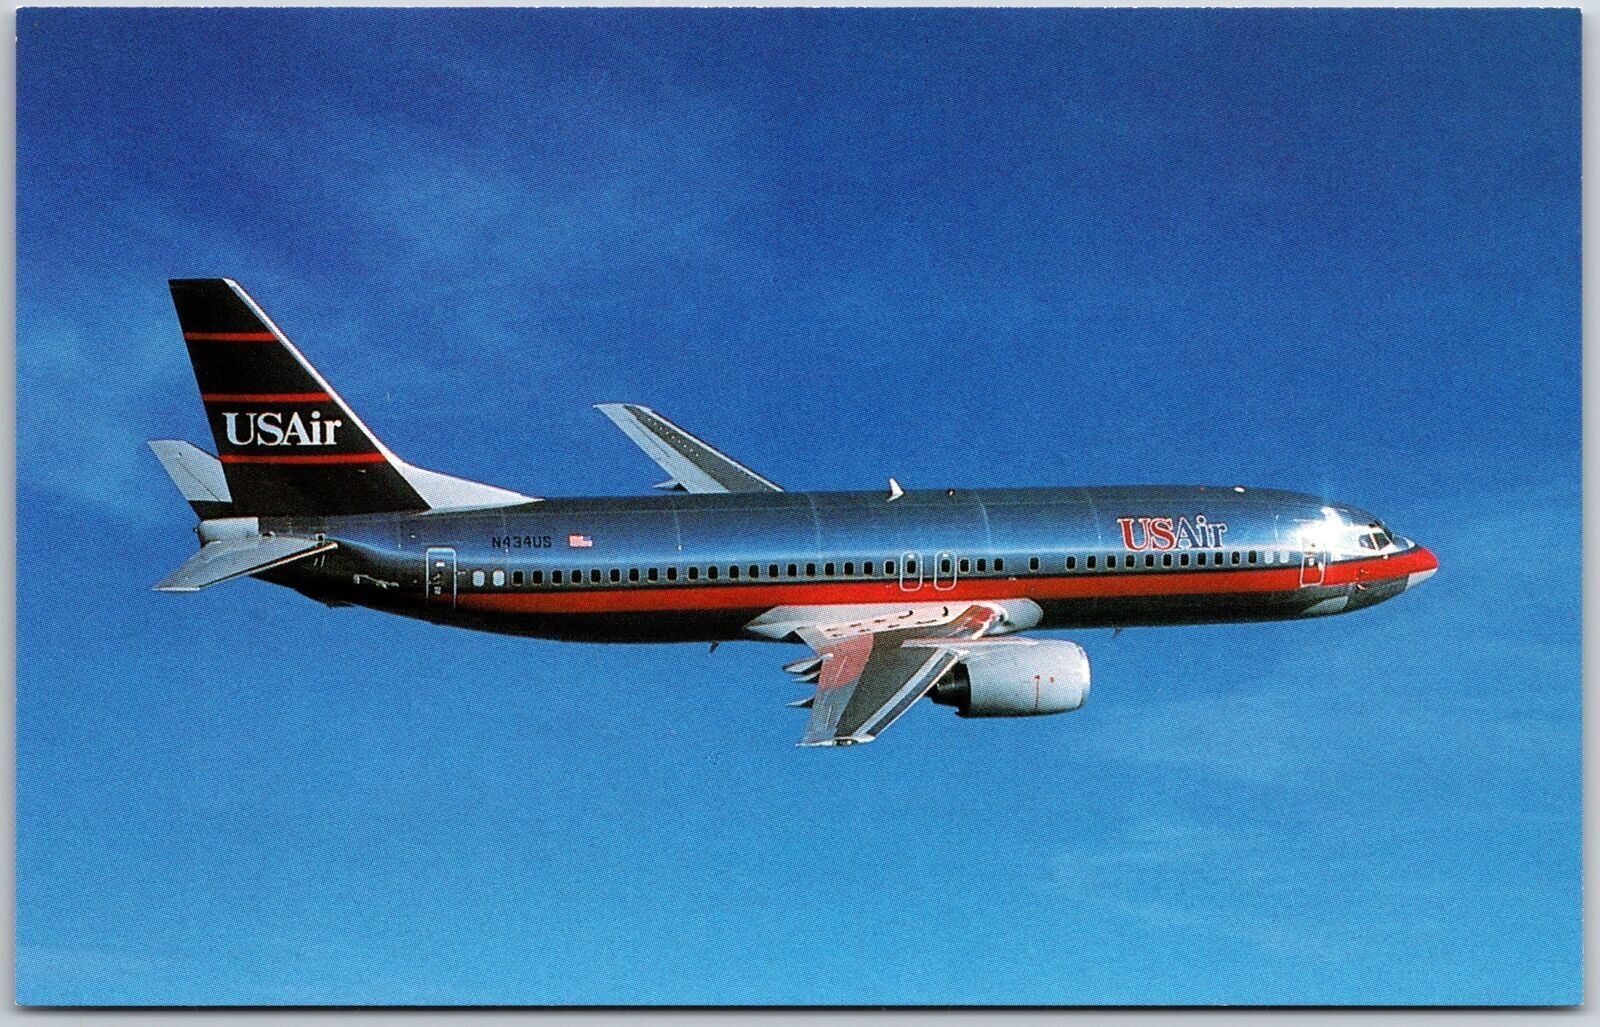 Airplane USAir America's Most Frequent Flyer 737-4700 Airline Postcard